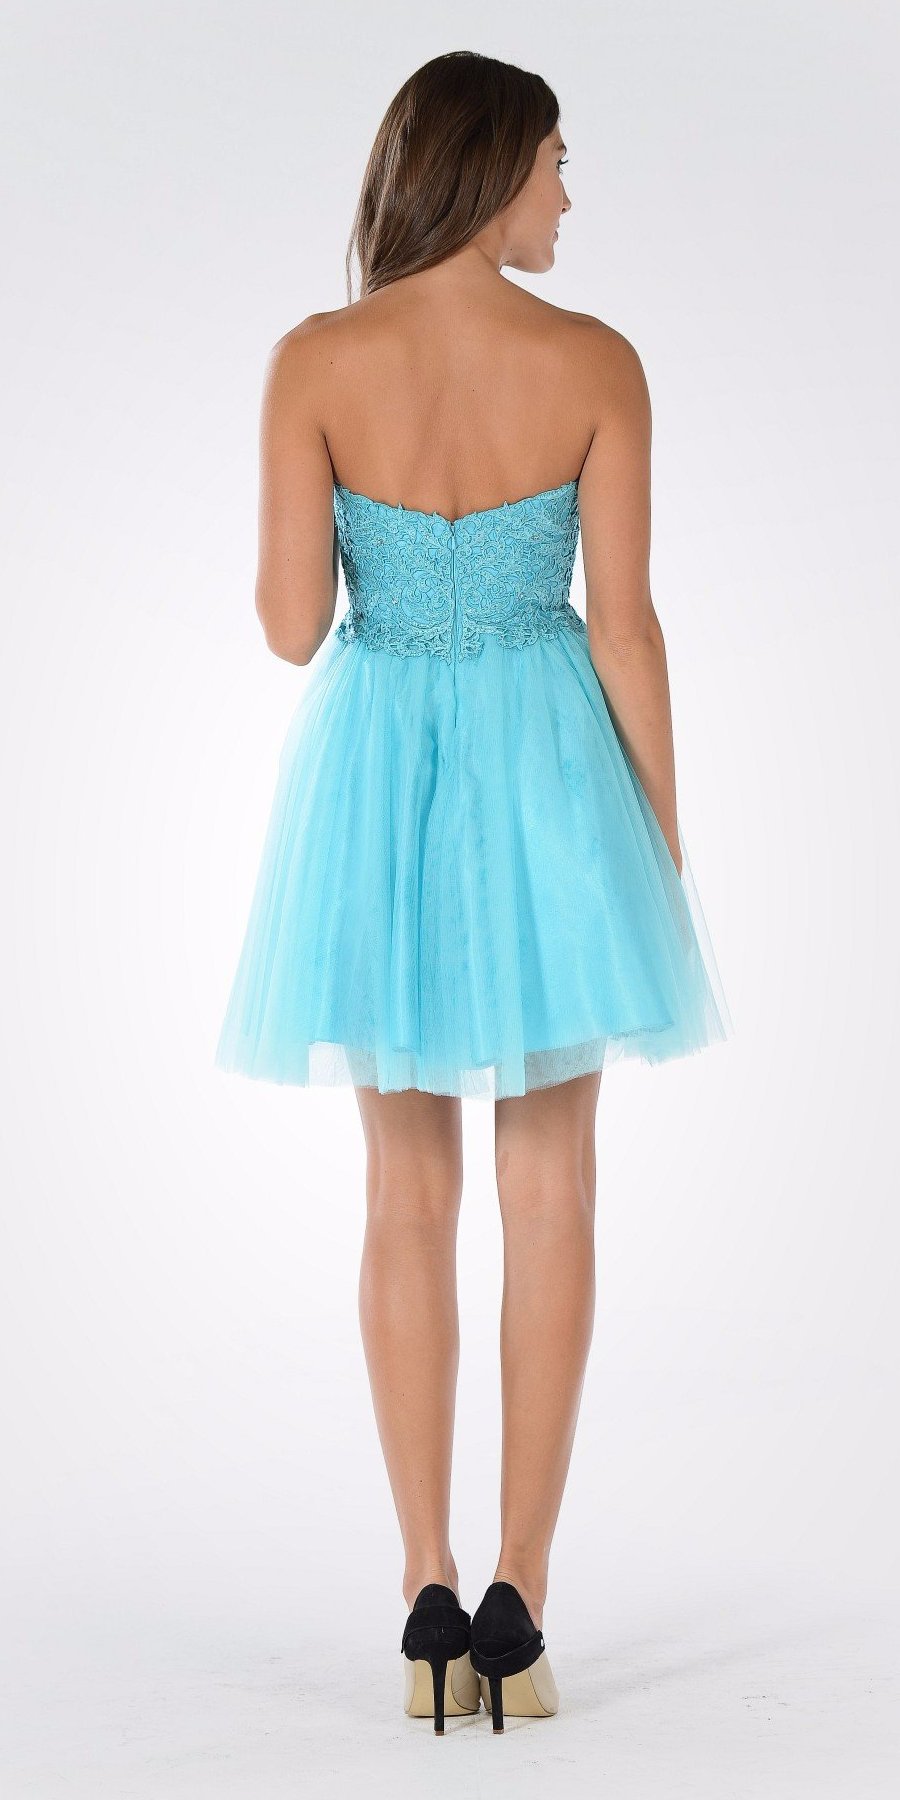 Poly USA 7718 - Lace Bodice Tulle Skirt A-line Homecoming Dress Strapless Aqua